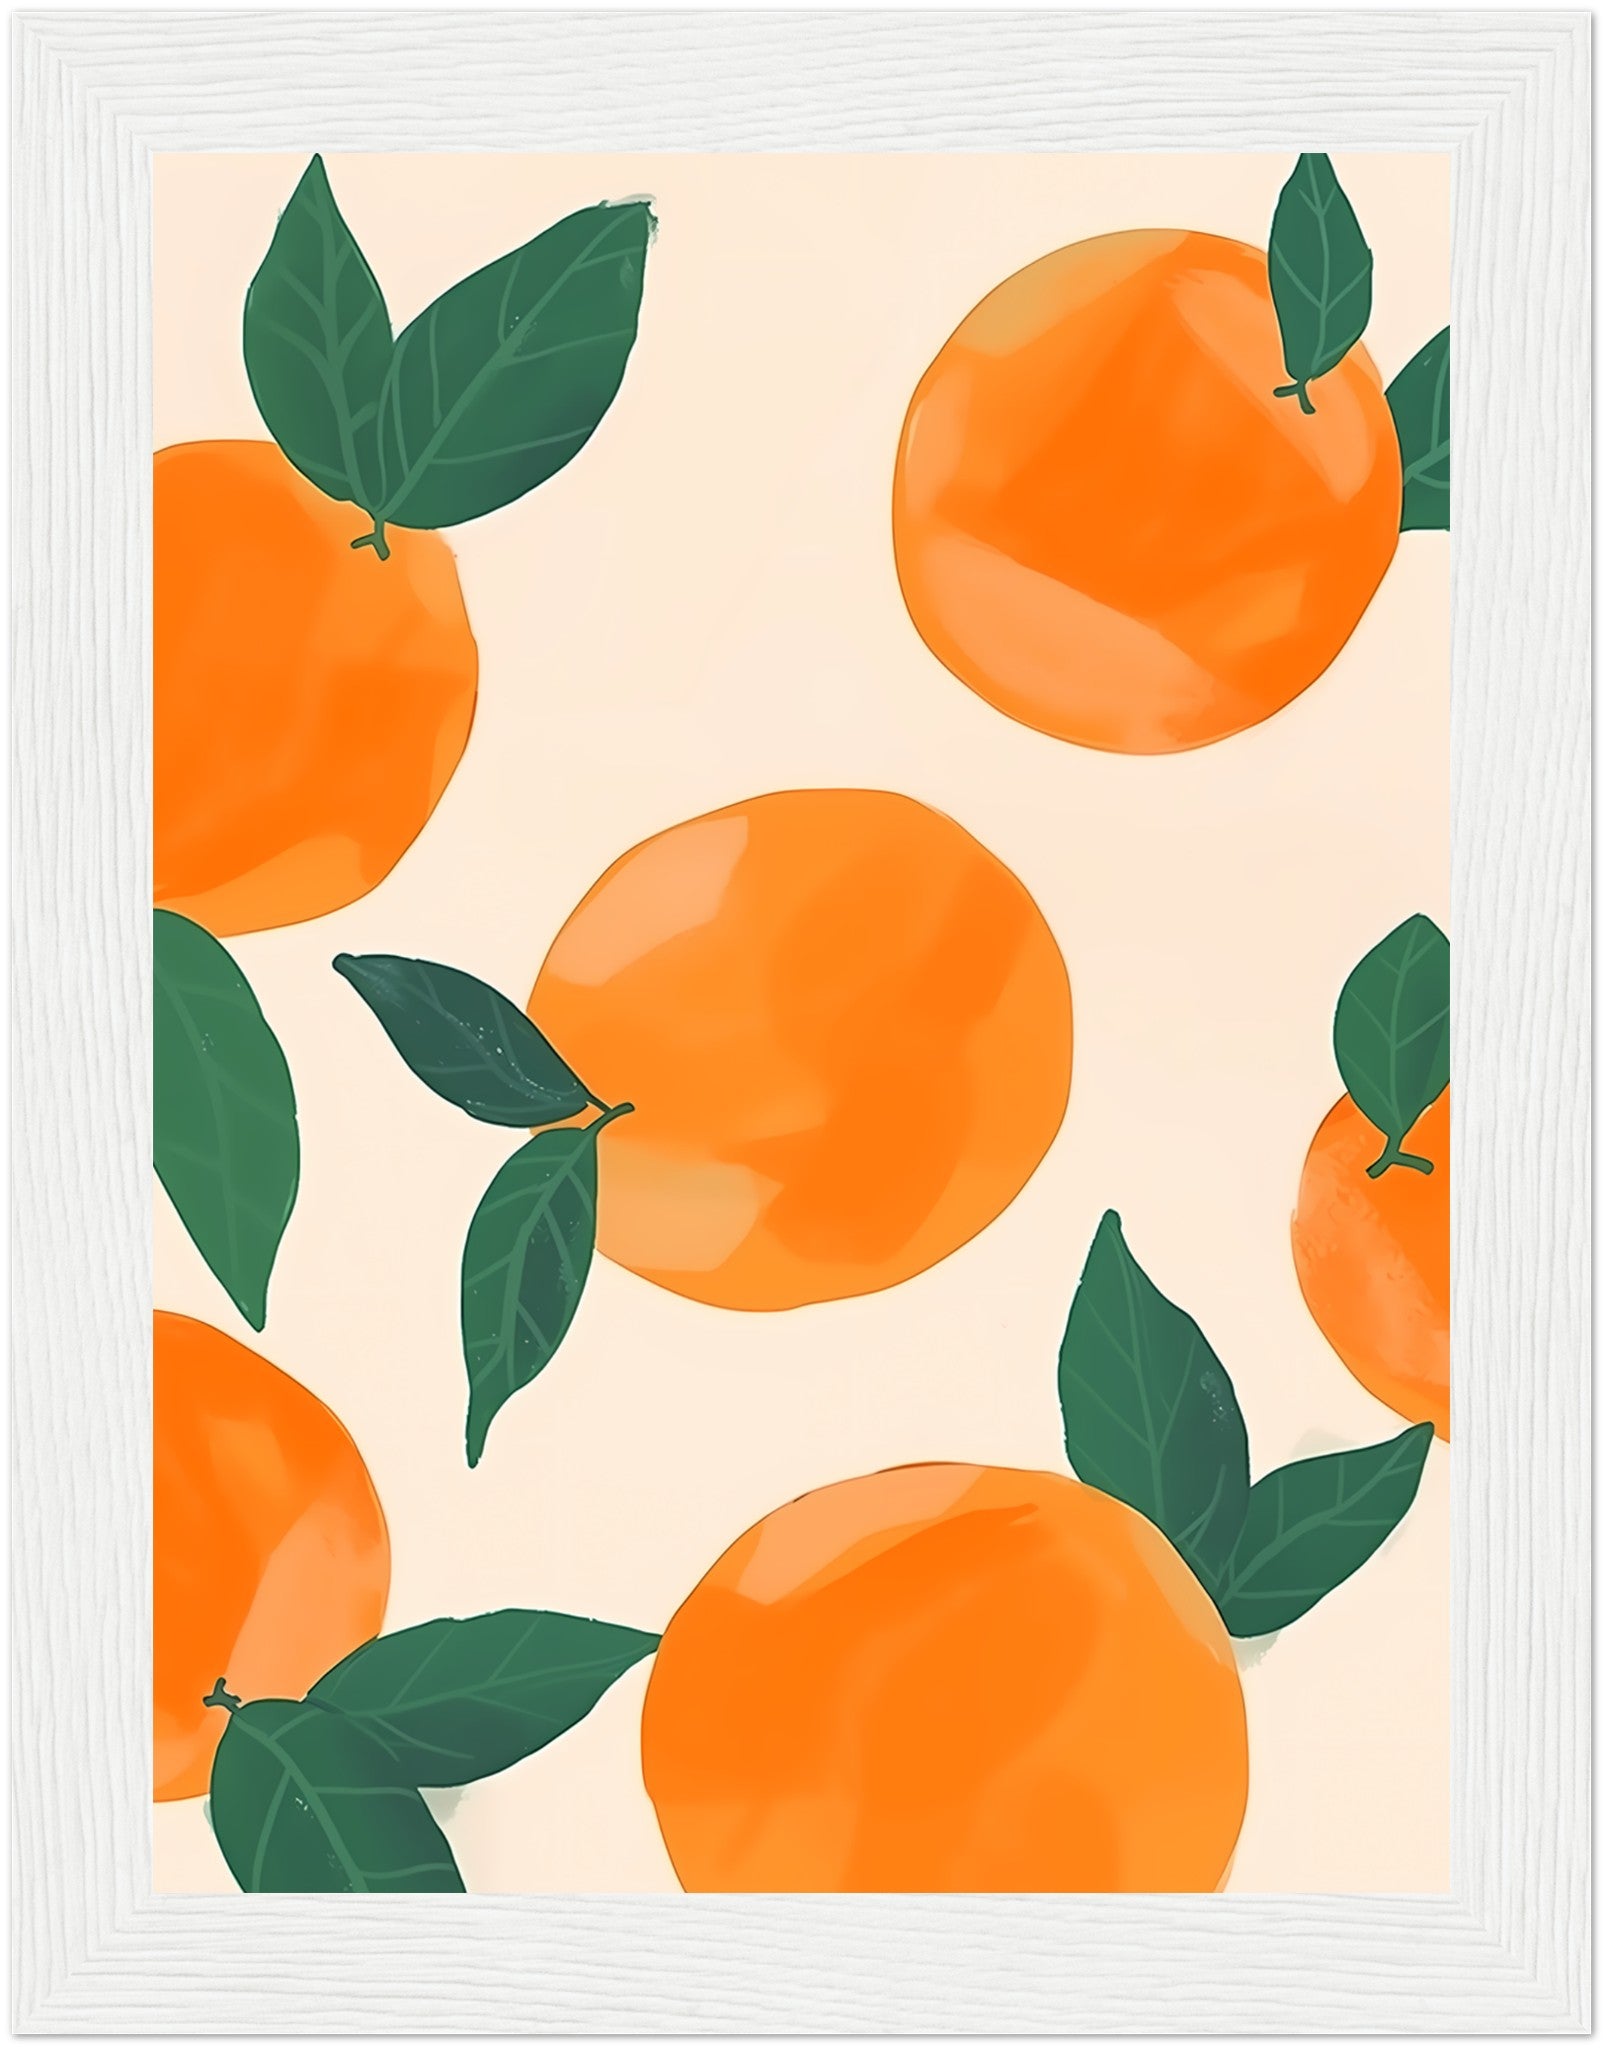 Illustration of vibrant oranges with leaves on a pale background, framed by a dark border.